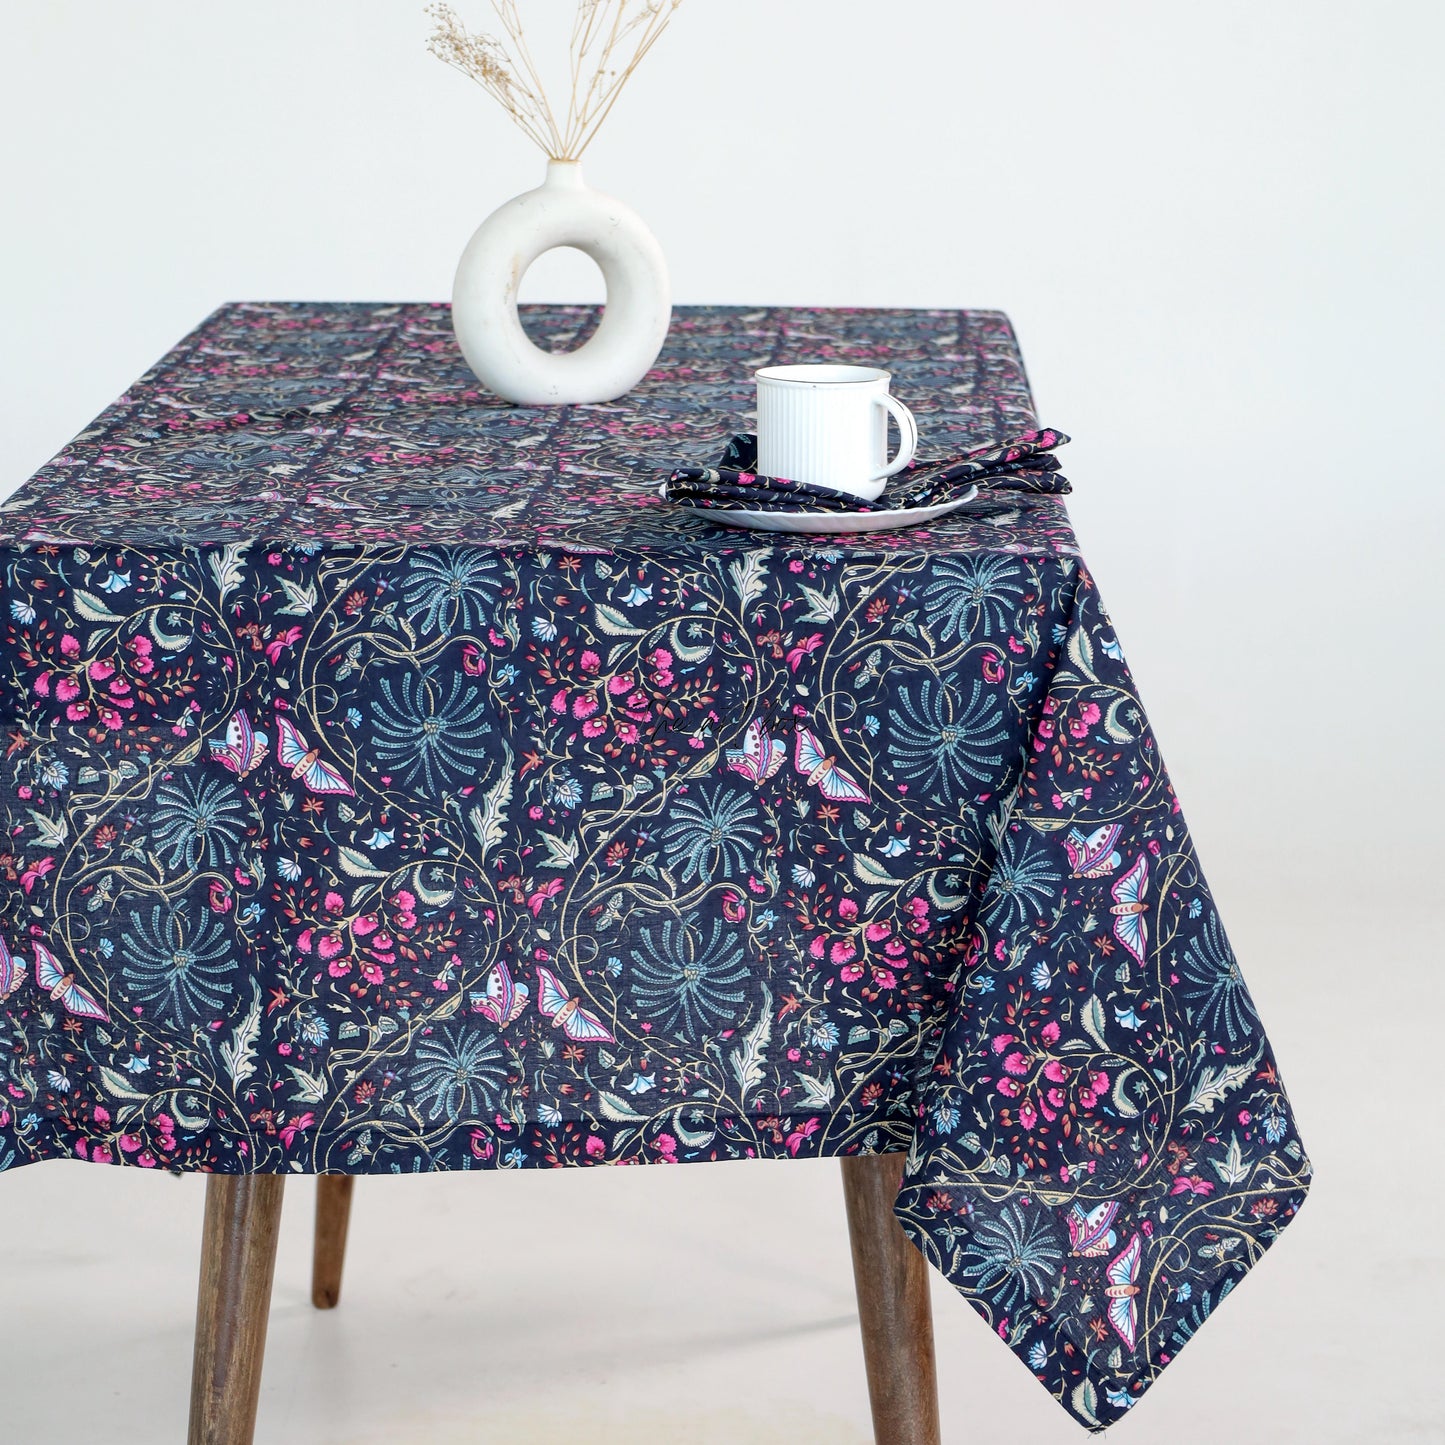 Floral Fantasy Transform Your Table with Black & Blue Printed Cotton Tablecloths